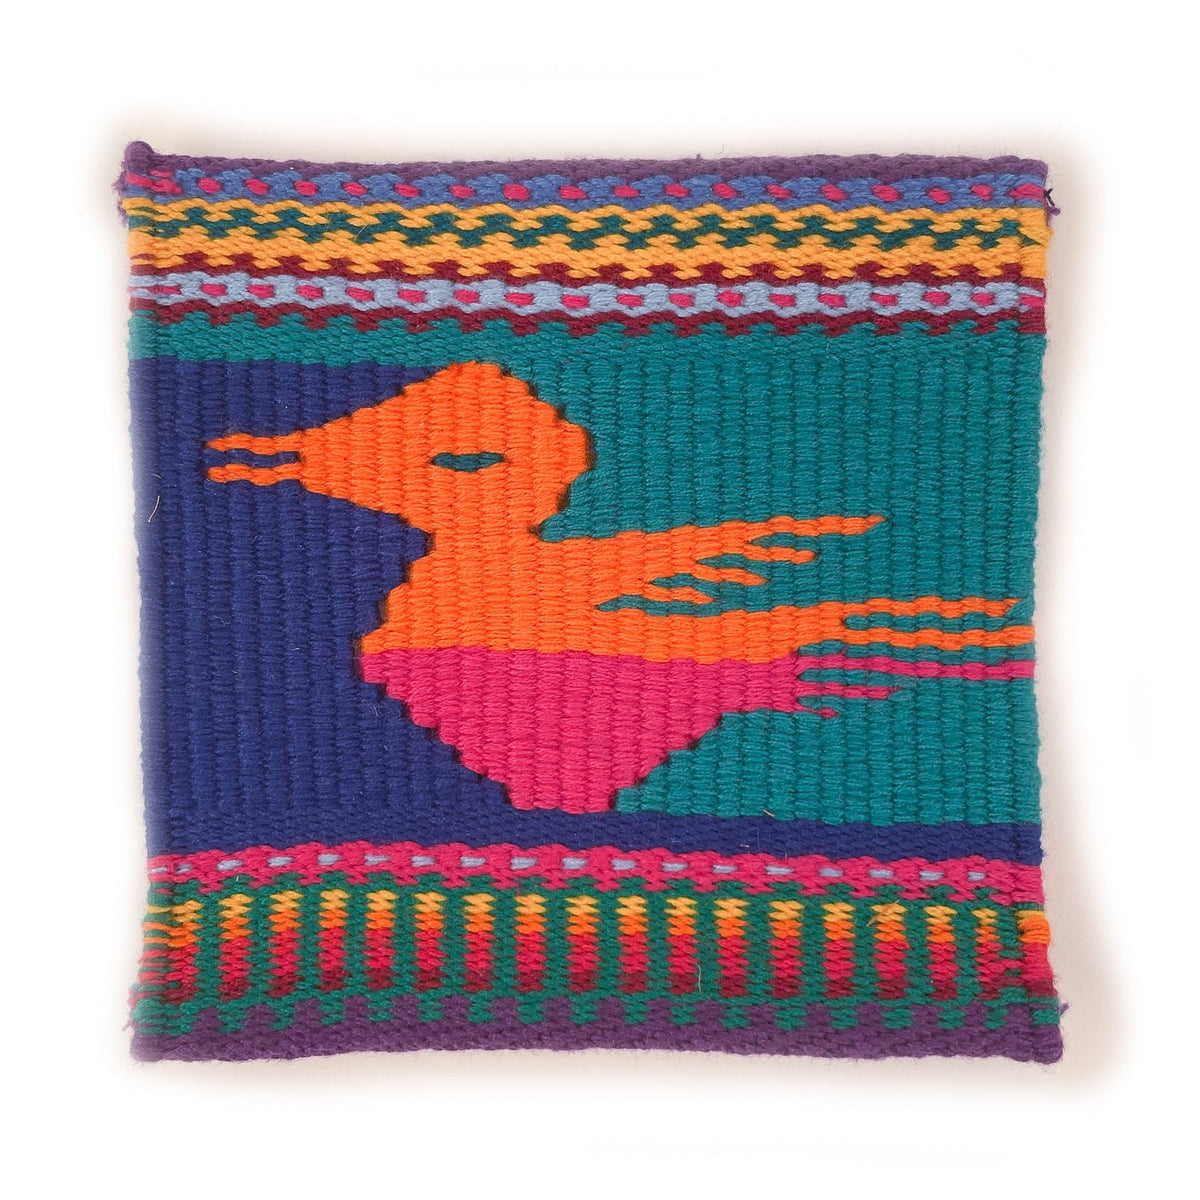 Tapestry woven coaster, featuring a bird in pink and orange on a multicolor background of teal and deep blue, with purple border and multicolor striped details